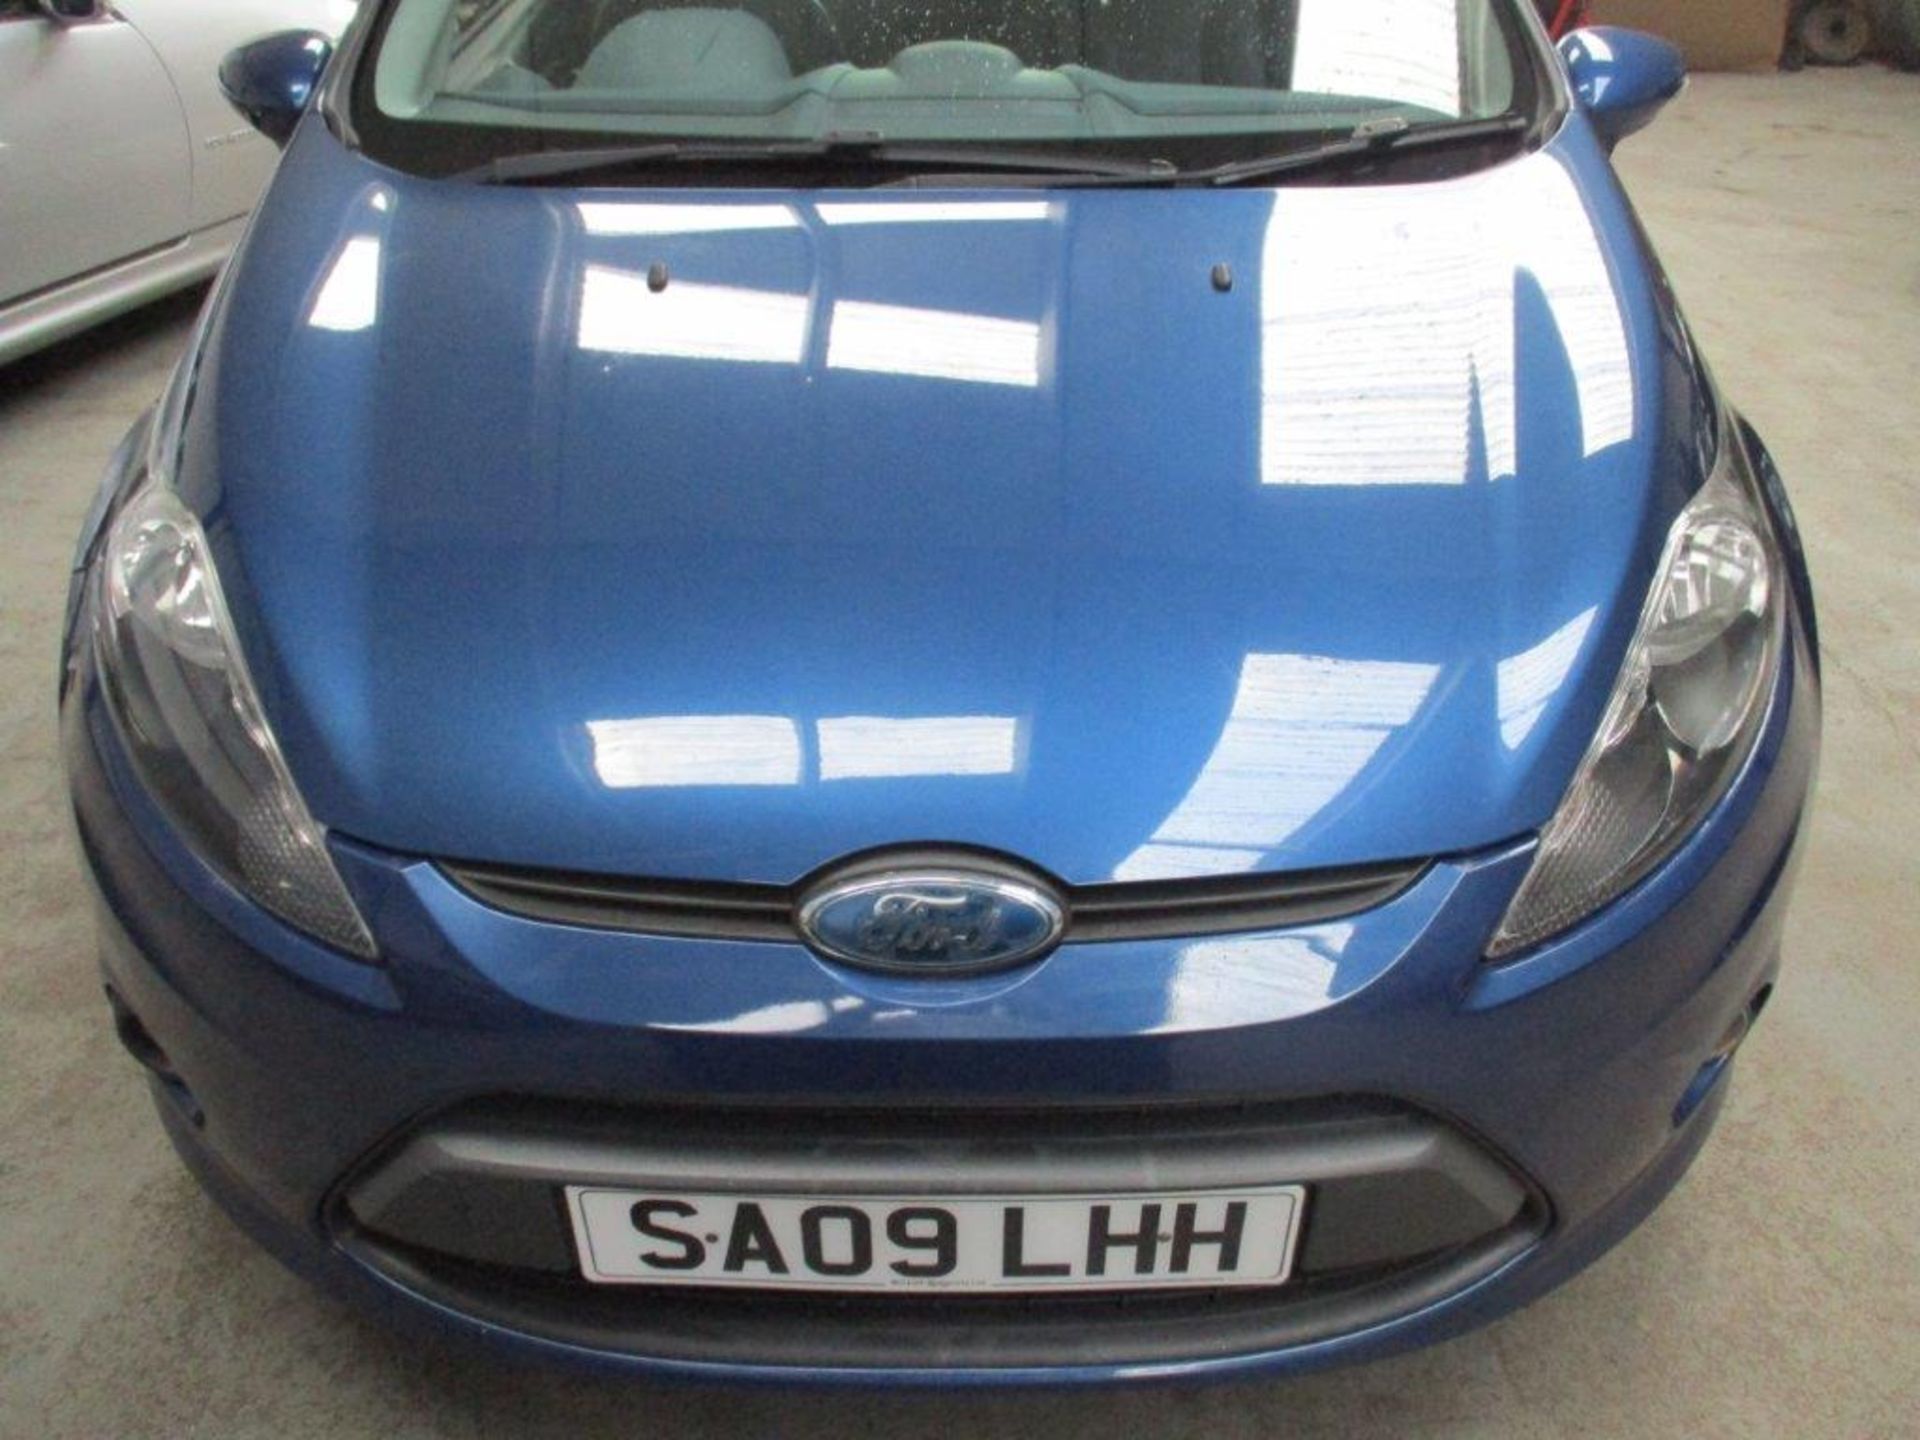 09 09 Ford Fiesta Style 82 - Image 2 of 16